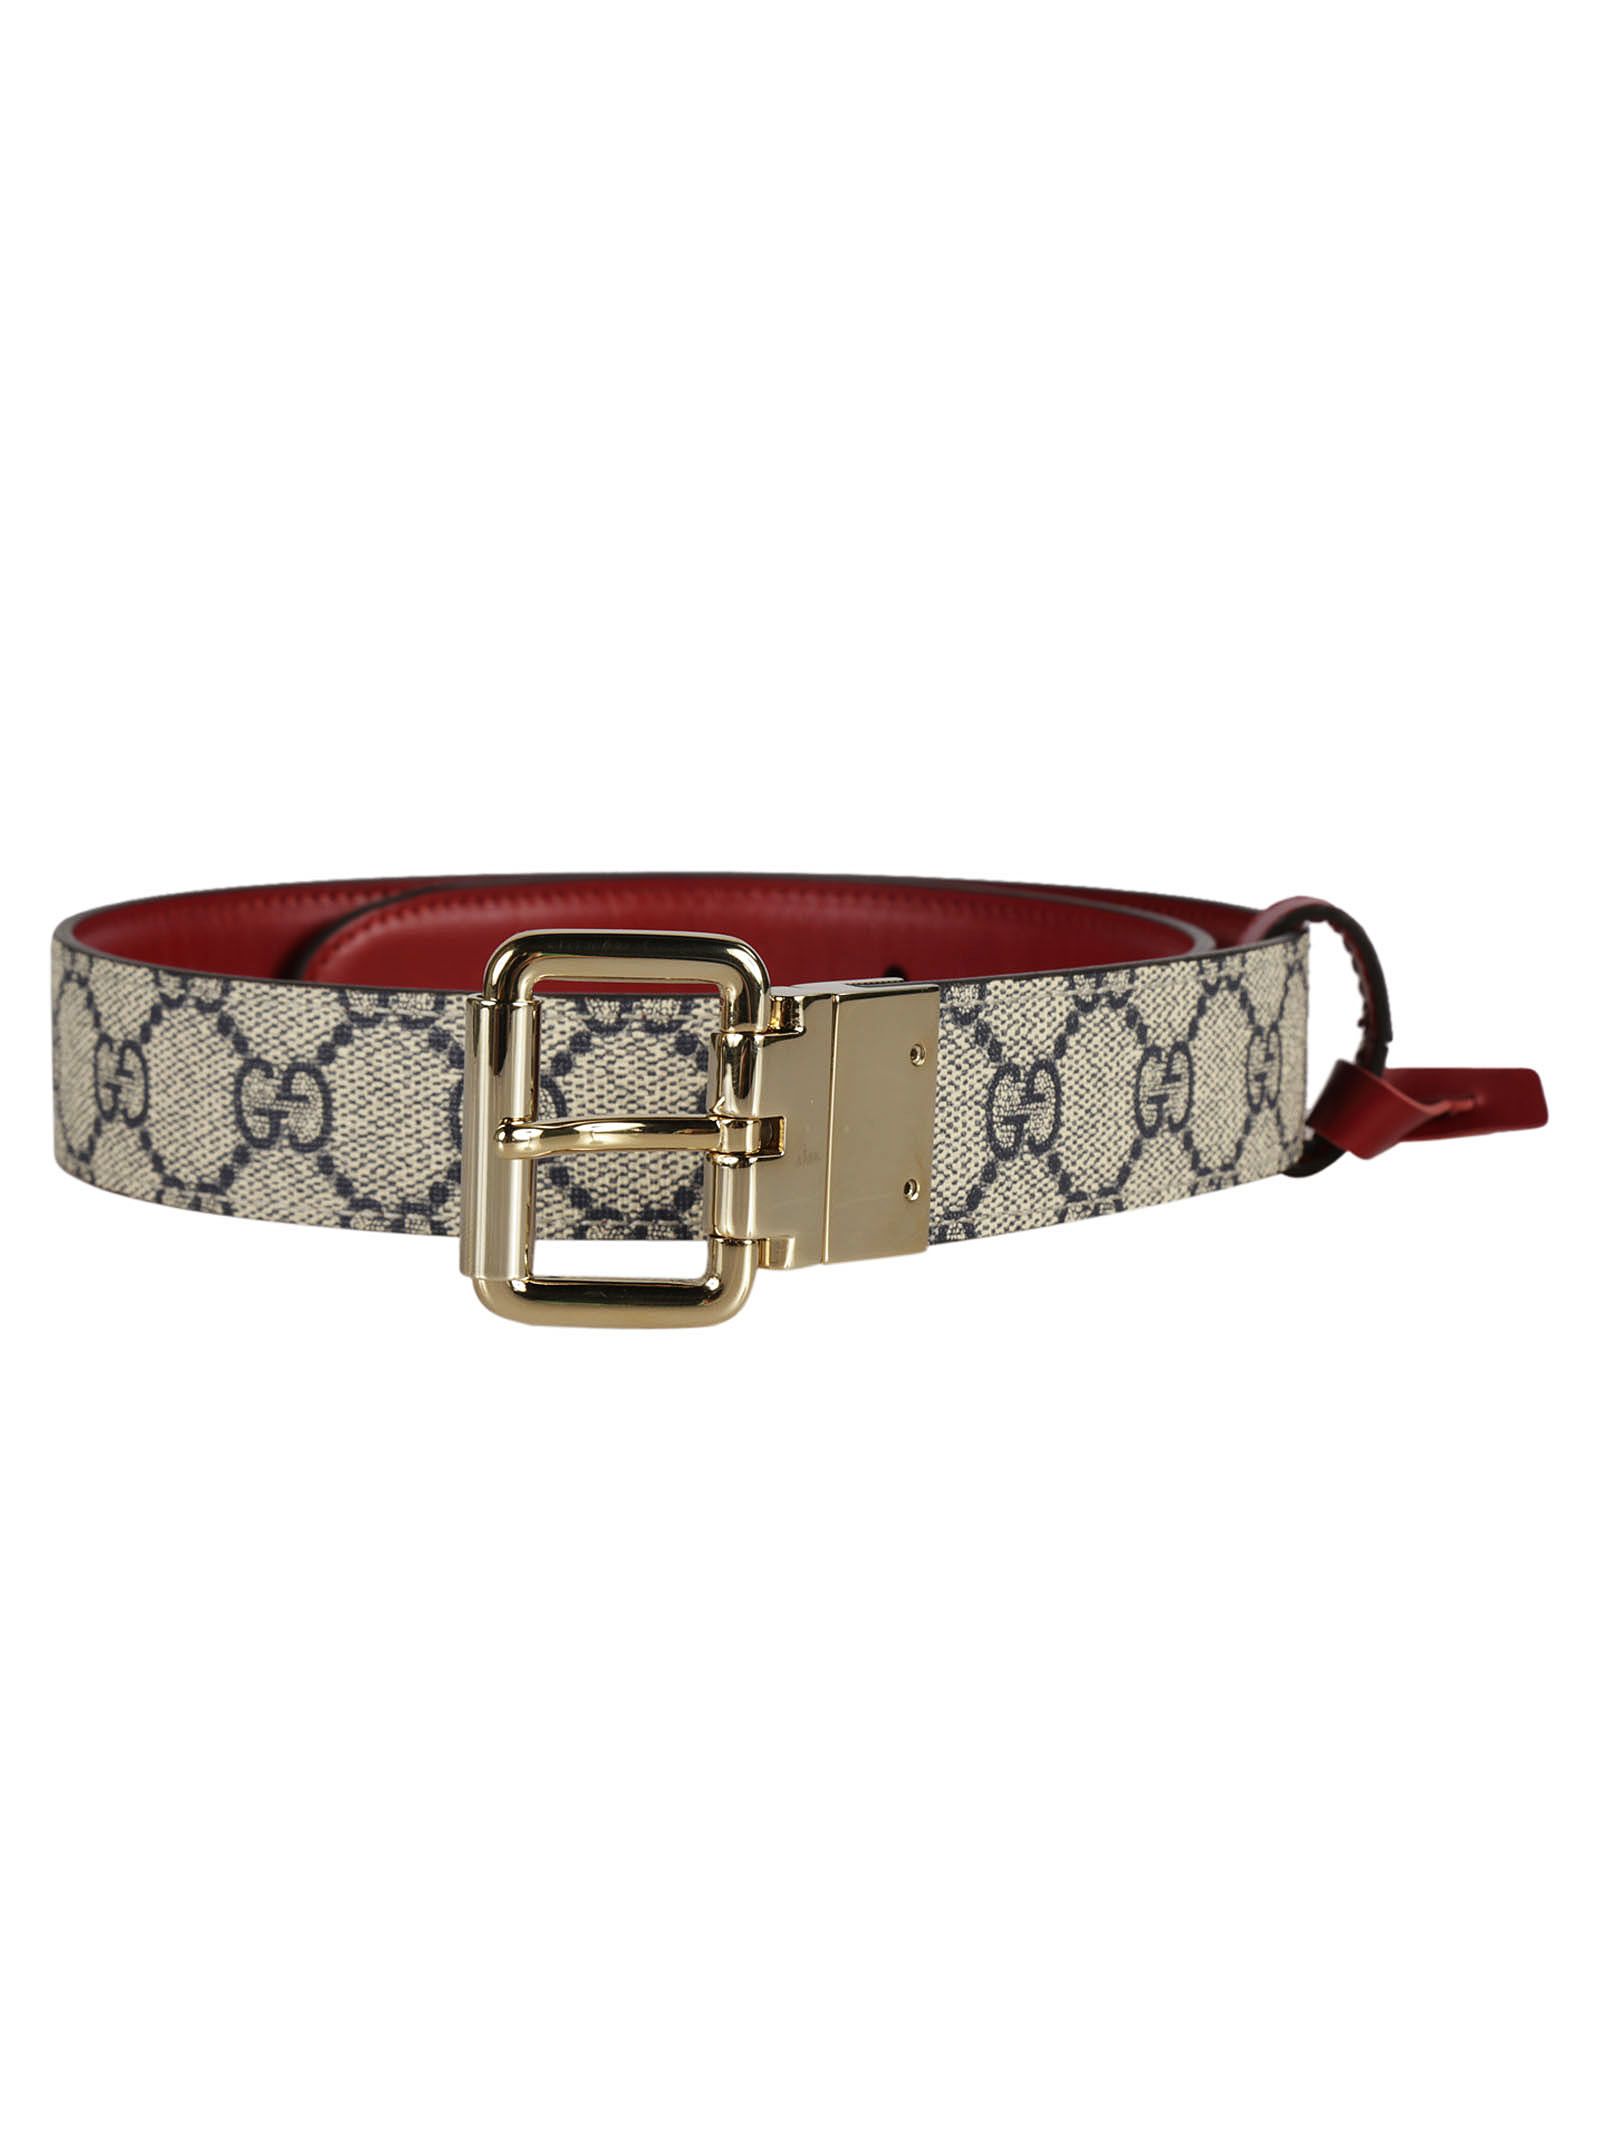 Gucci - Gucci Reversible Leather and GG Supreme Belt - Beige/Red, Men&#39;s Belts | Italist